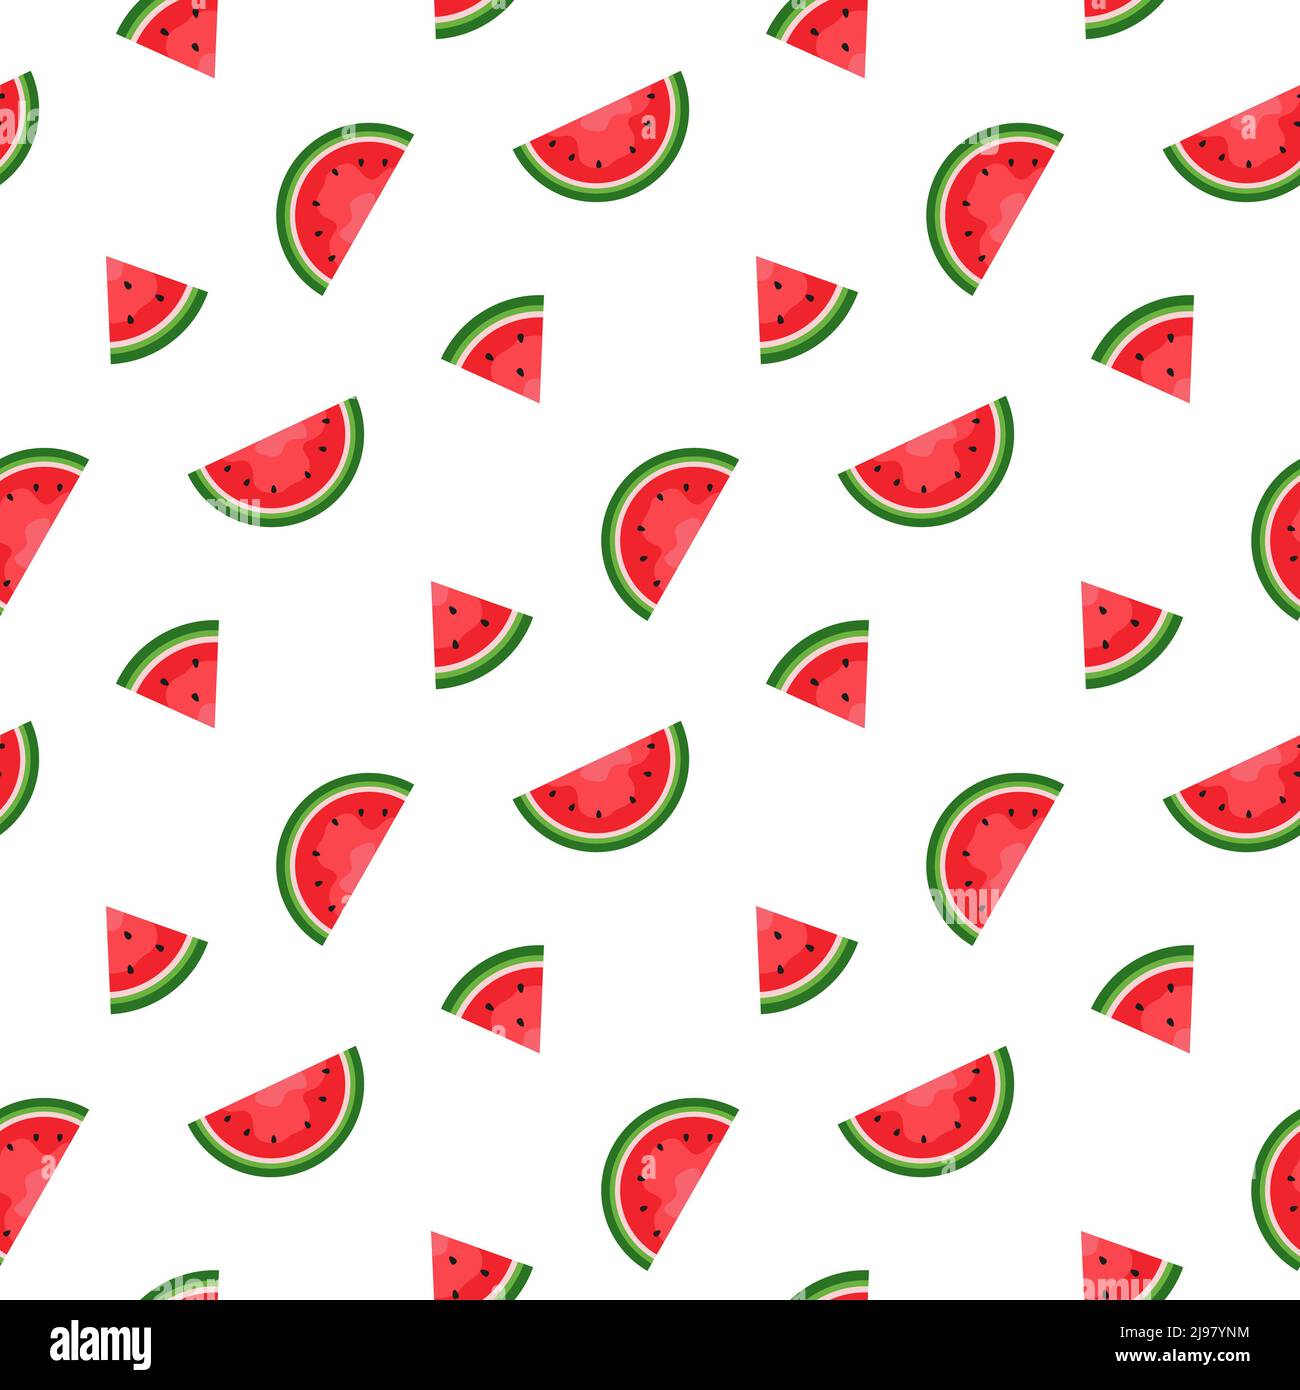 Watermelon background and seamless pattern, flat design of green leaves and flower and watermelon juice illustration, Fresh and juicy fruit concept of Stock Photo